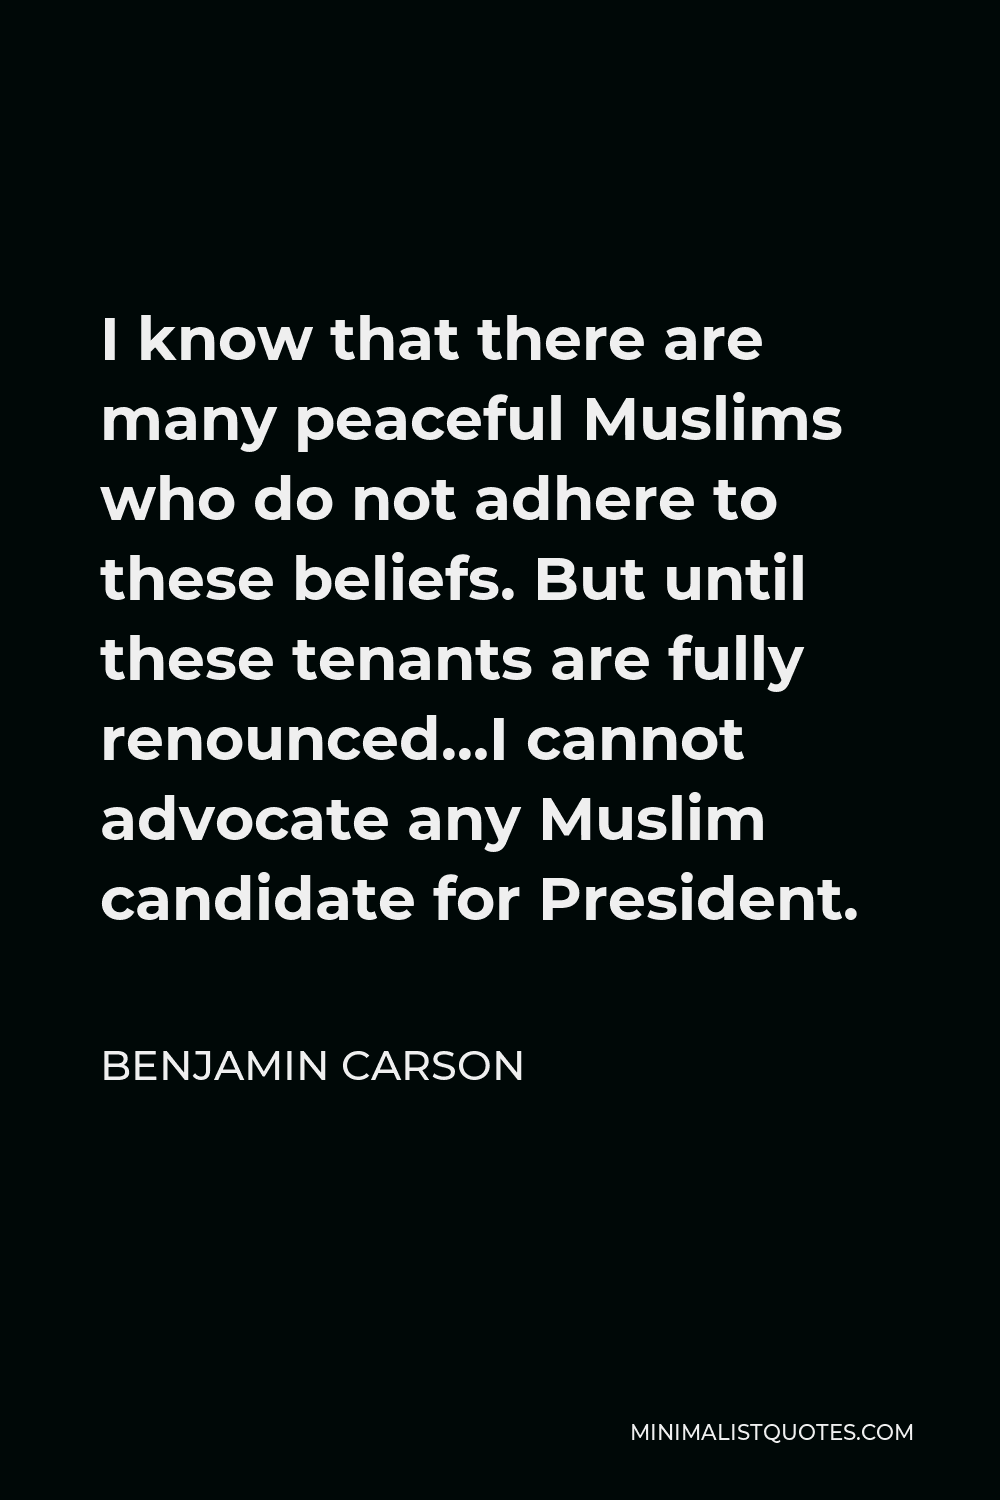 Benjamin Carson Quote - I know that there are many peaceful Muslims who do not adhere to these beliefs. But until these tenants are fully renounced…I cannot advocate any Muslim candidate for President.